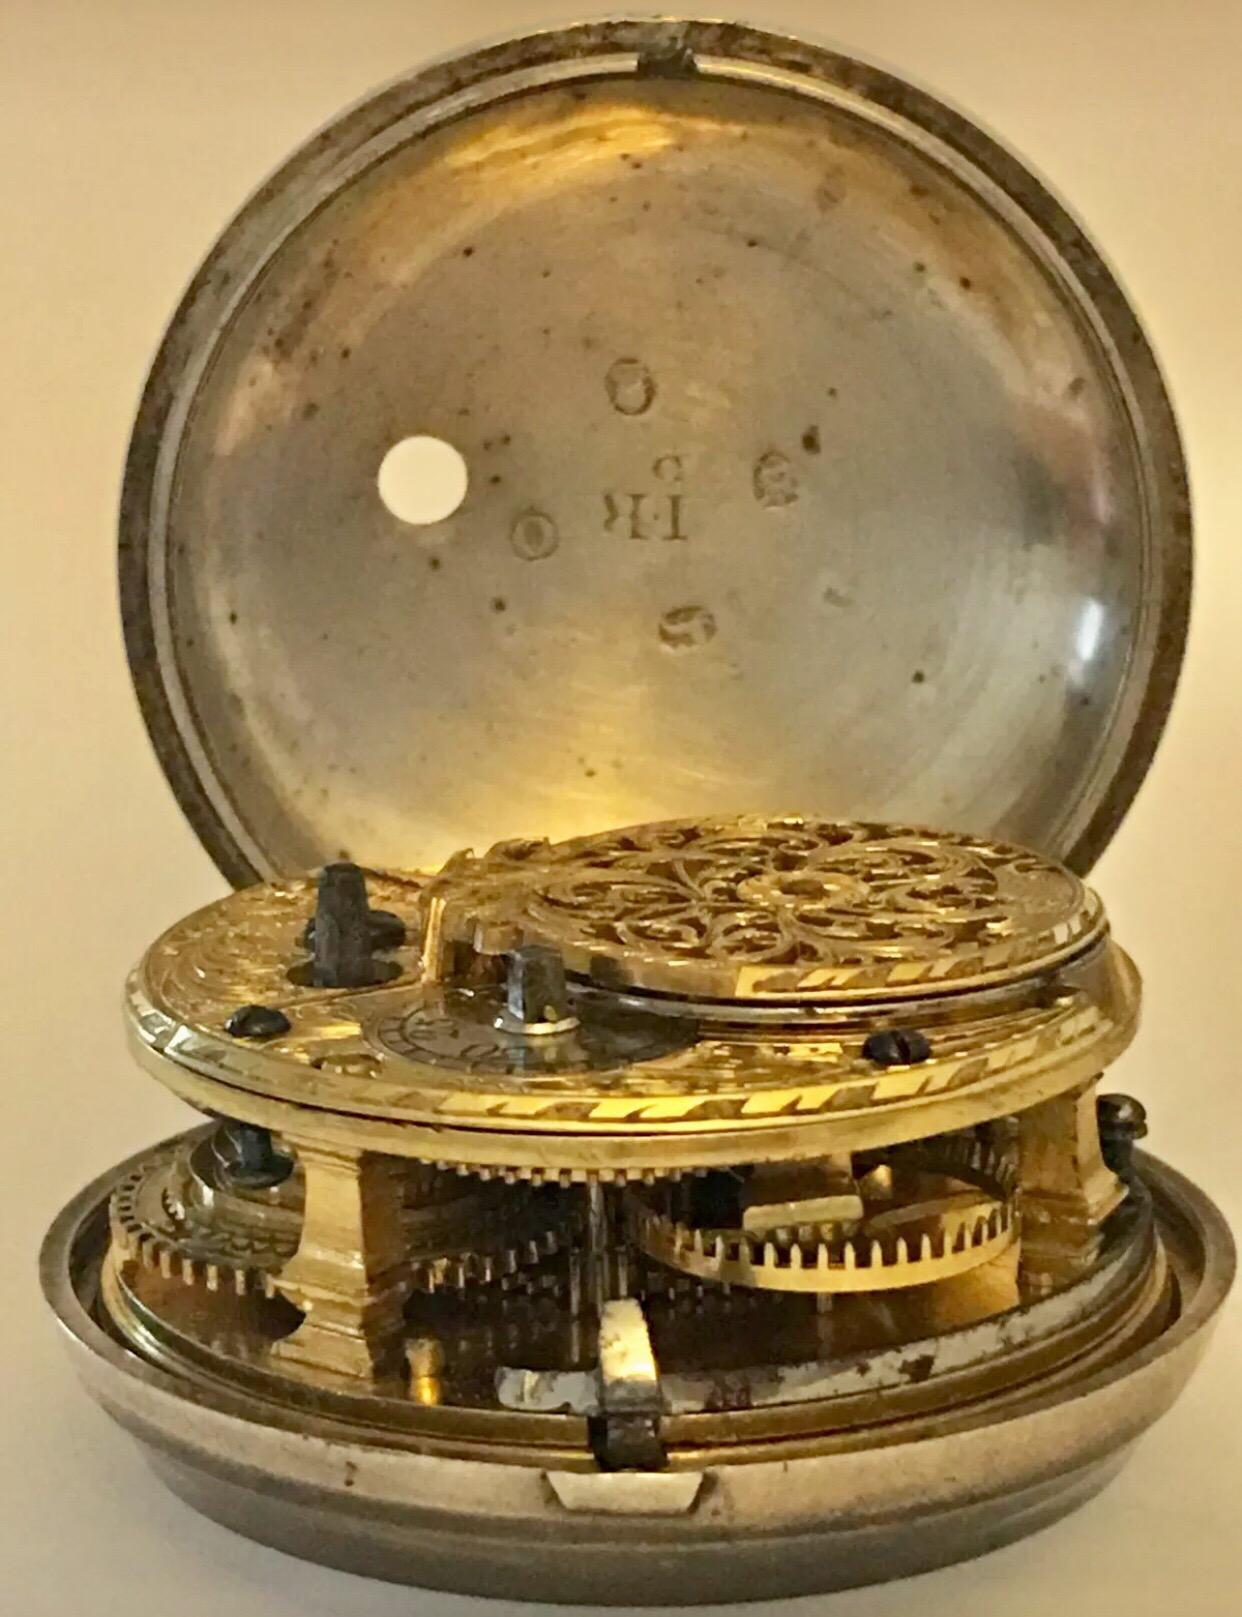 Early Rare Verge Fusee Silver Pair Case Pocket Watch by Thomas Maston, London 1